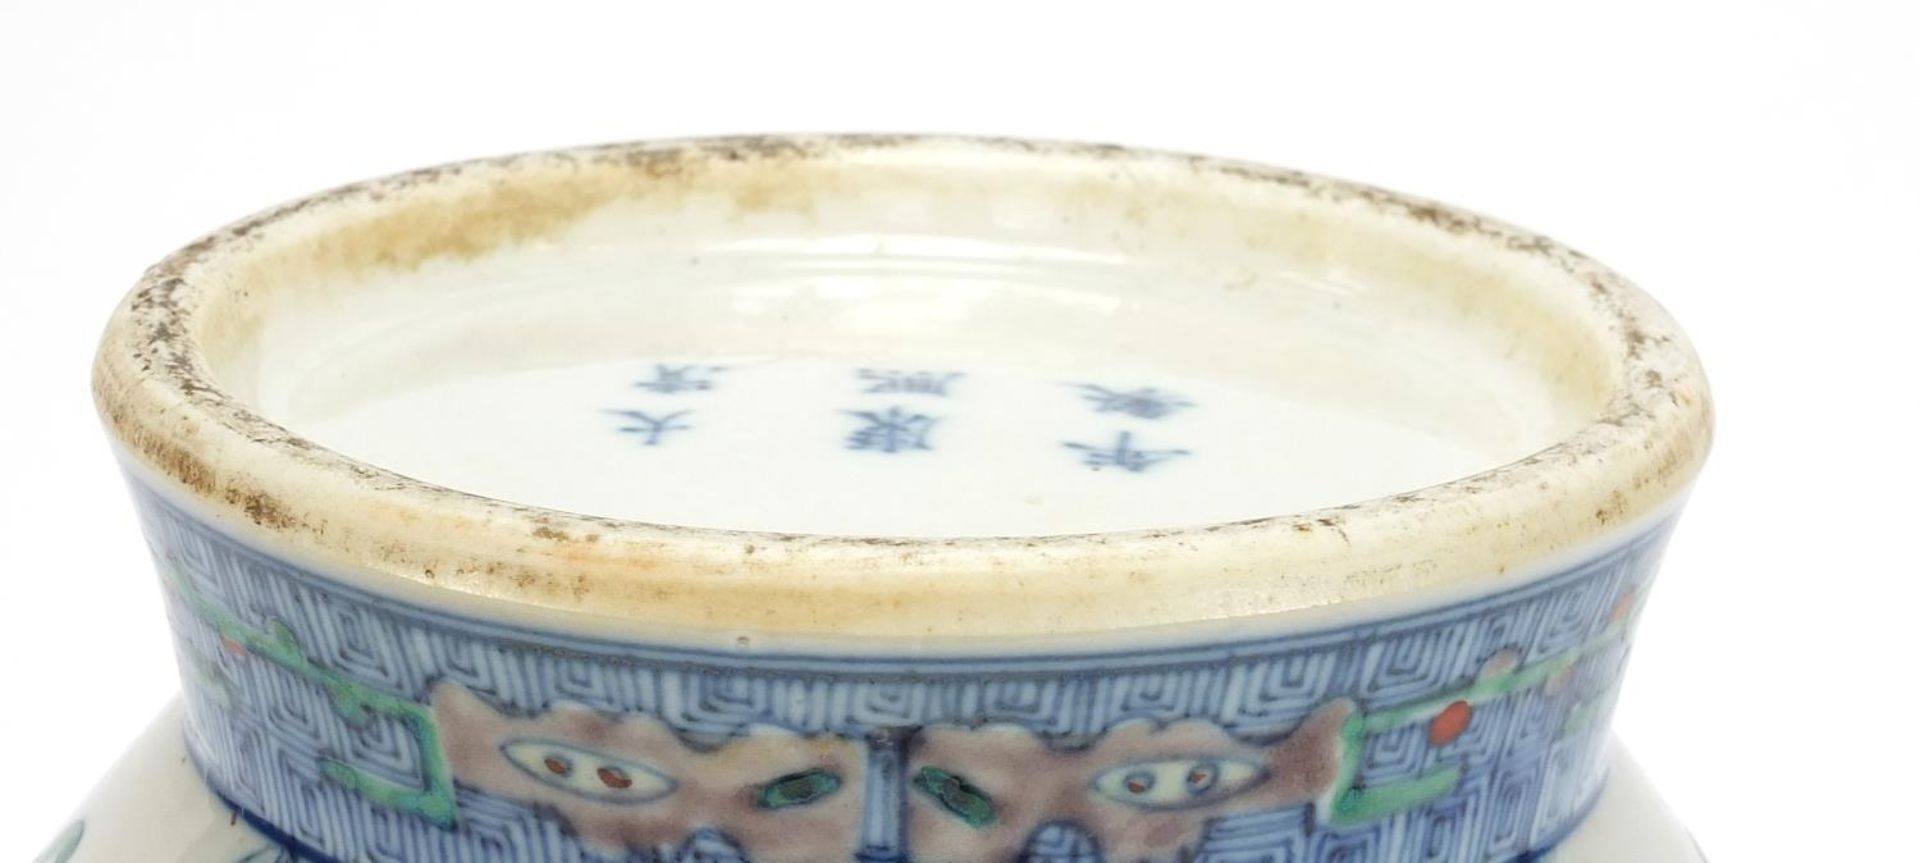 Chinese doucai porcelain vase with handles, hand painted with mythical faces and heads, six figure - Image 10 of 10